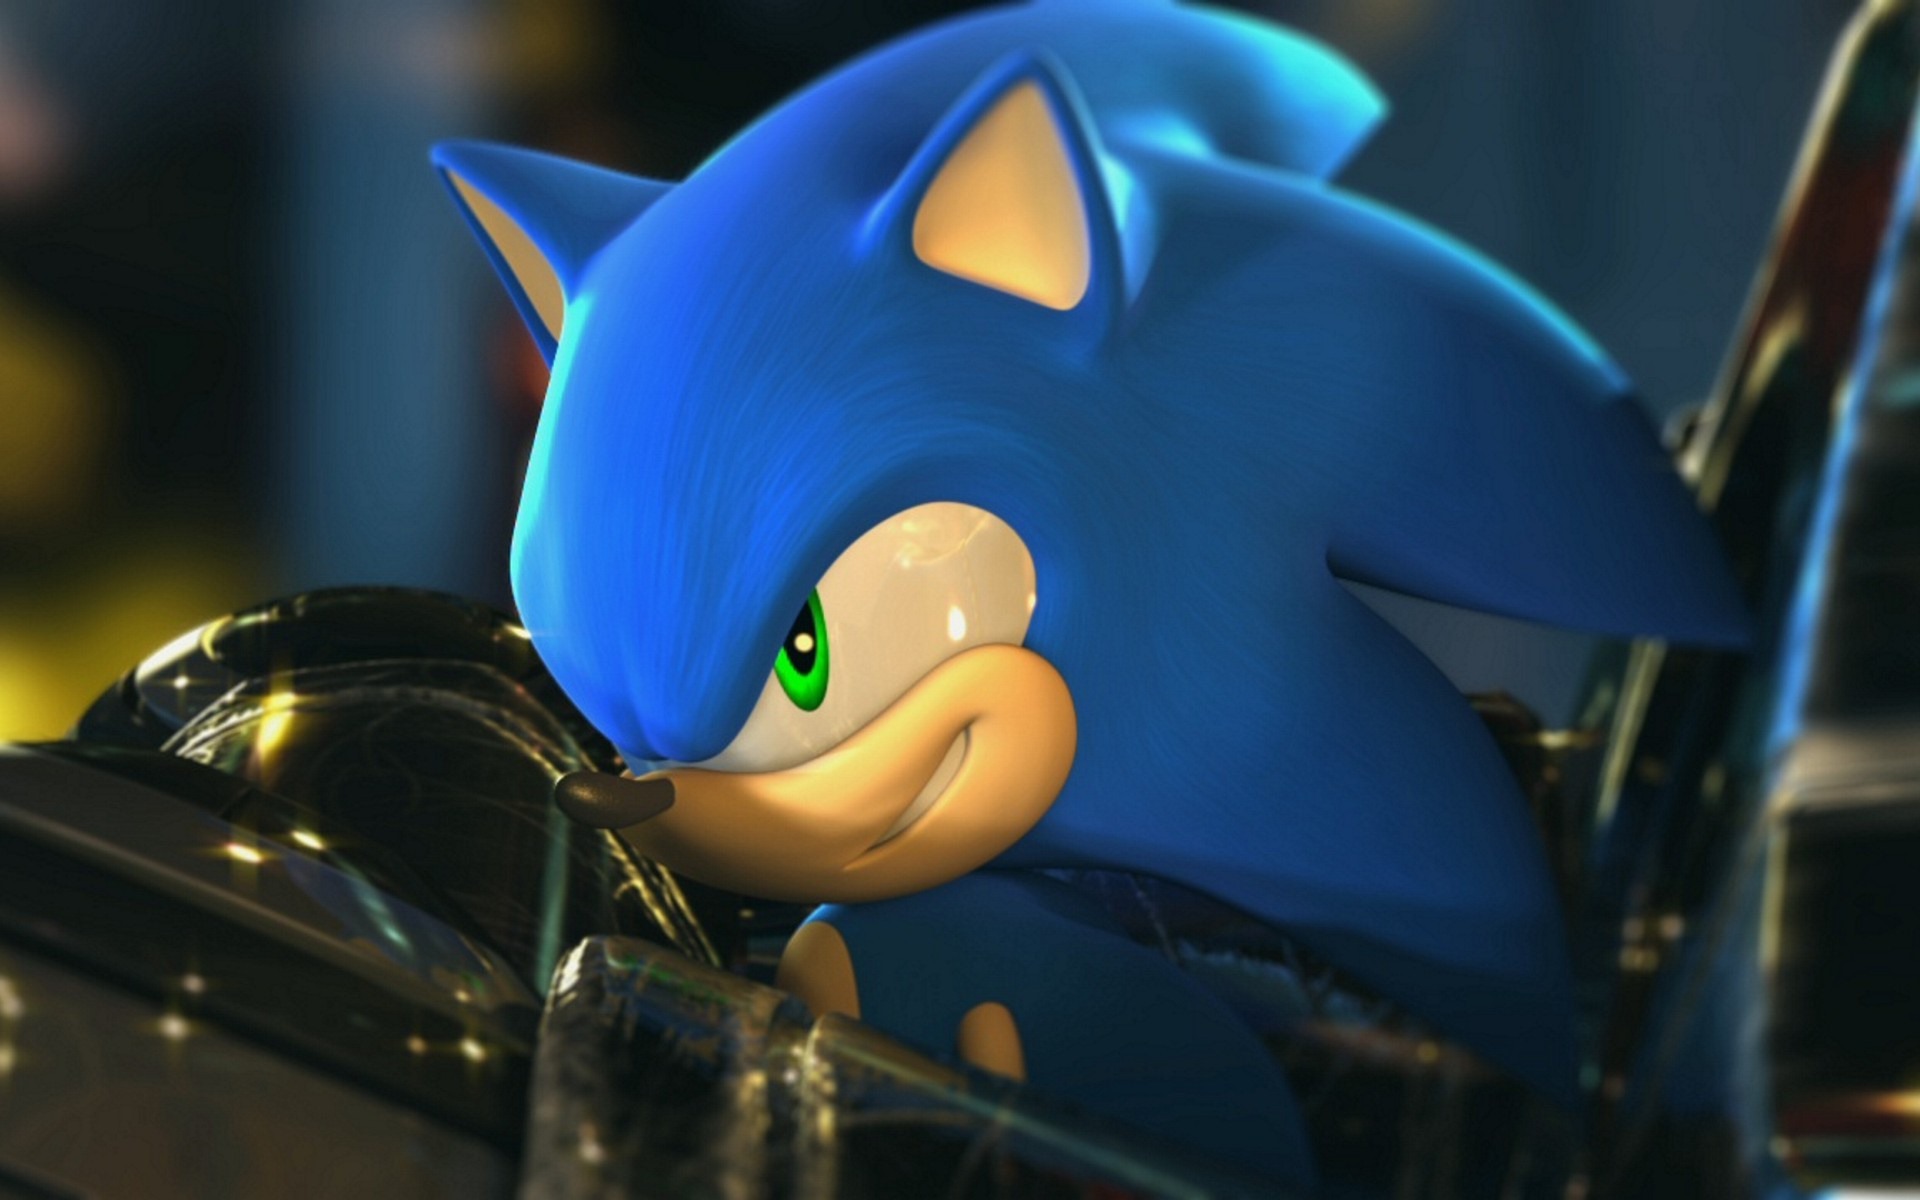 Sonic HD wallpapers #8 - 1920x1200